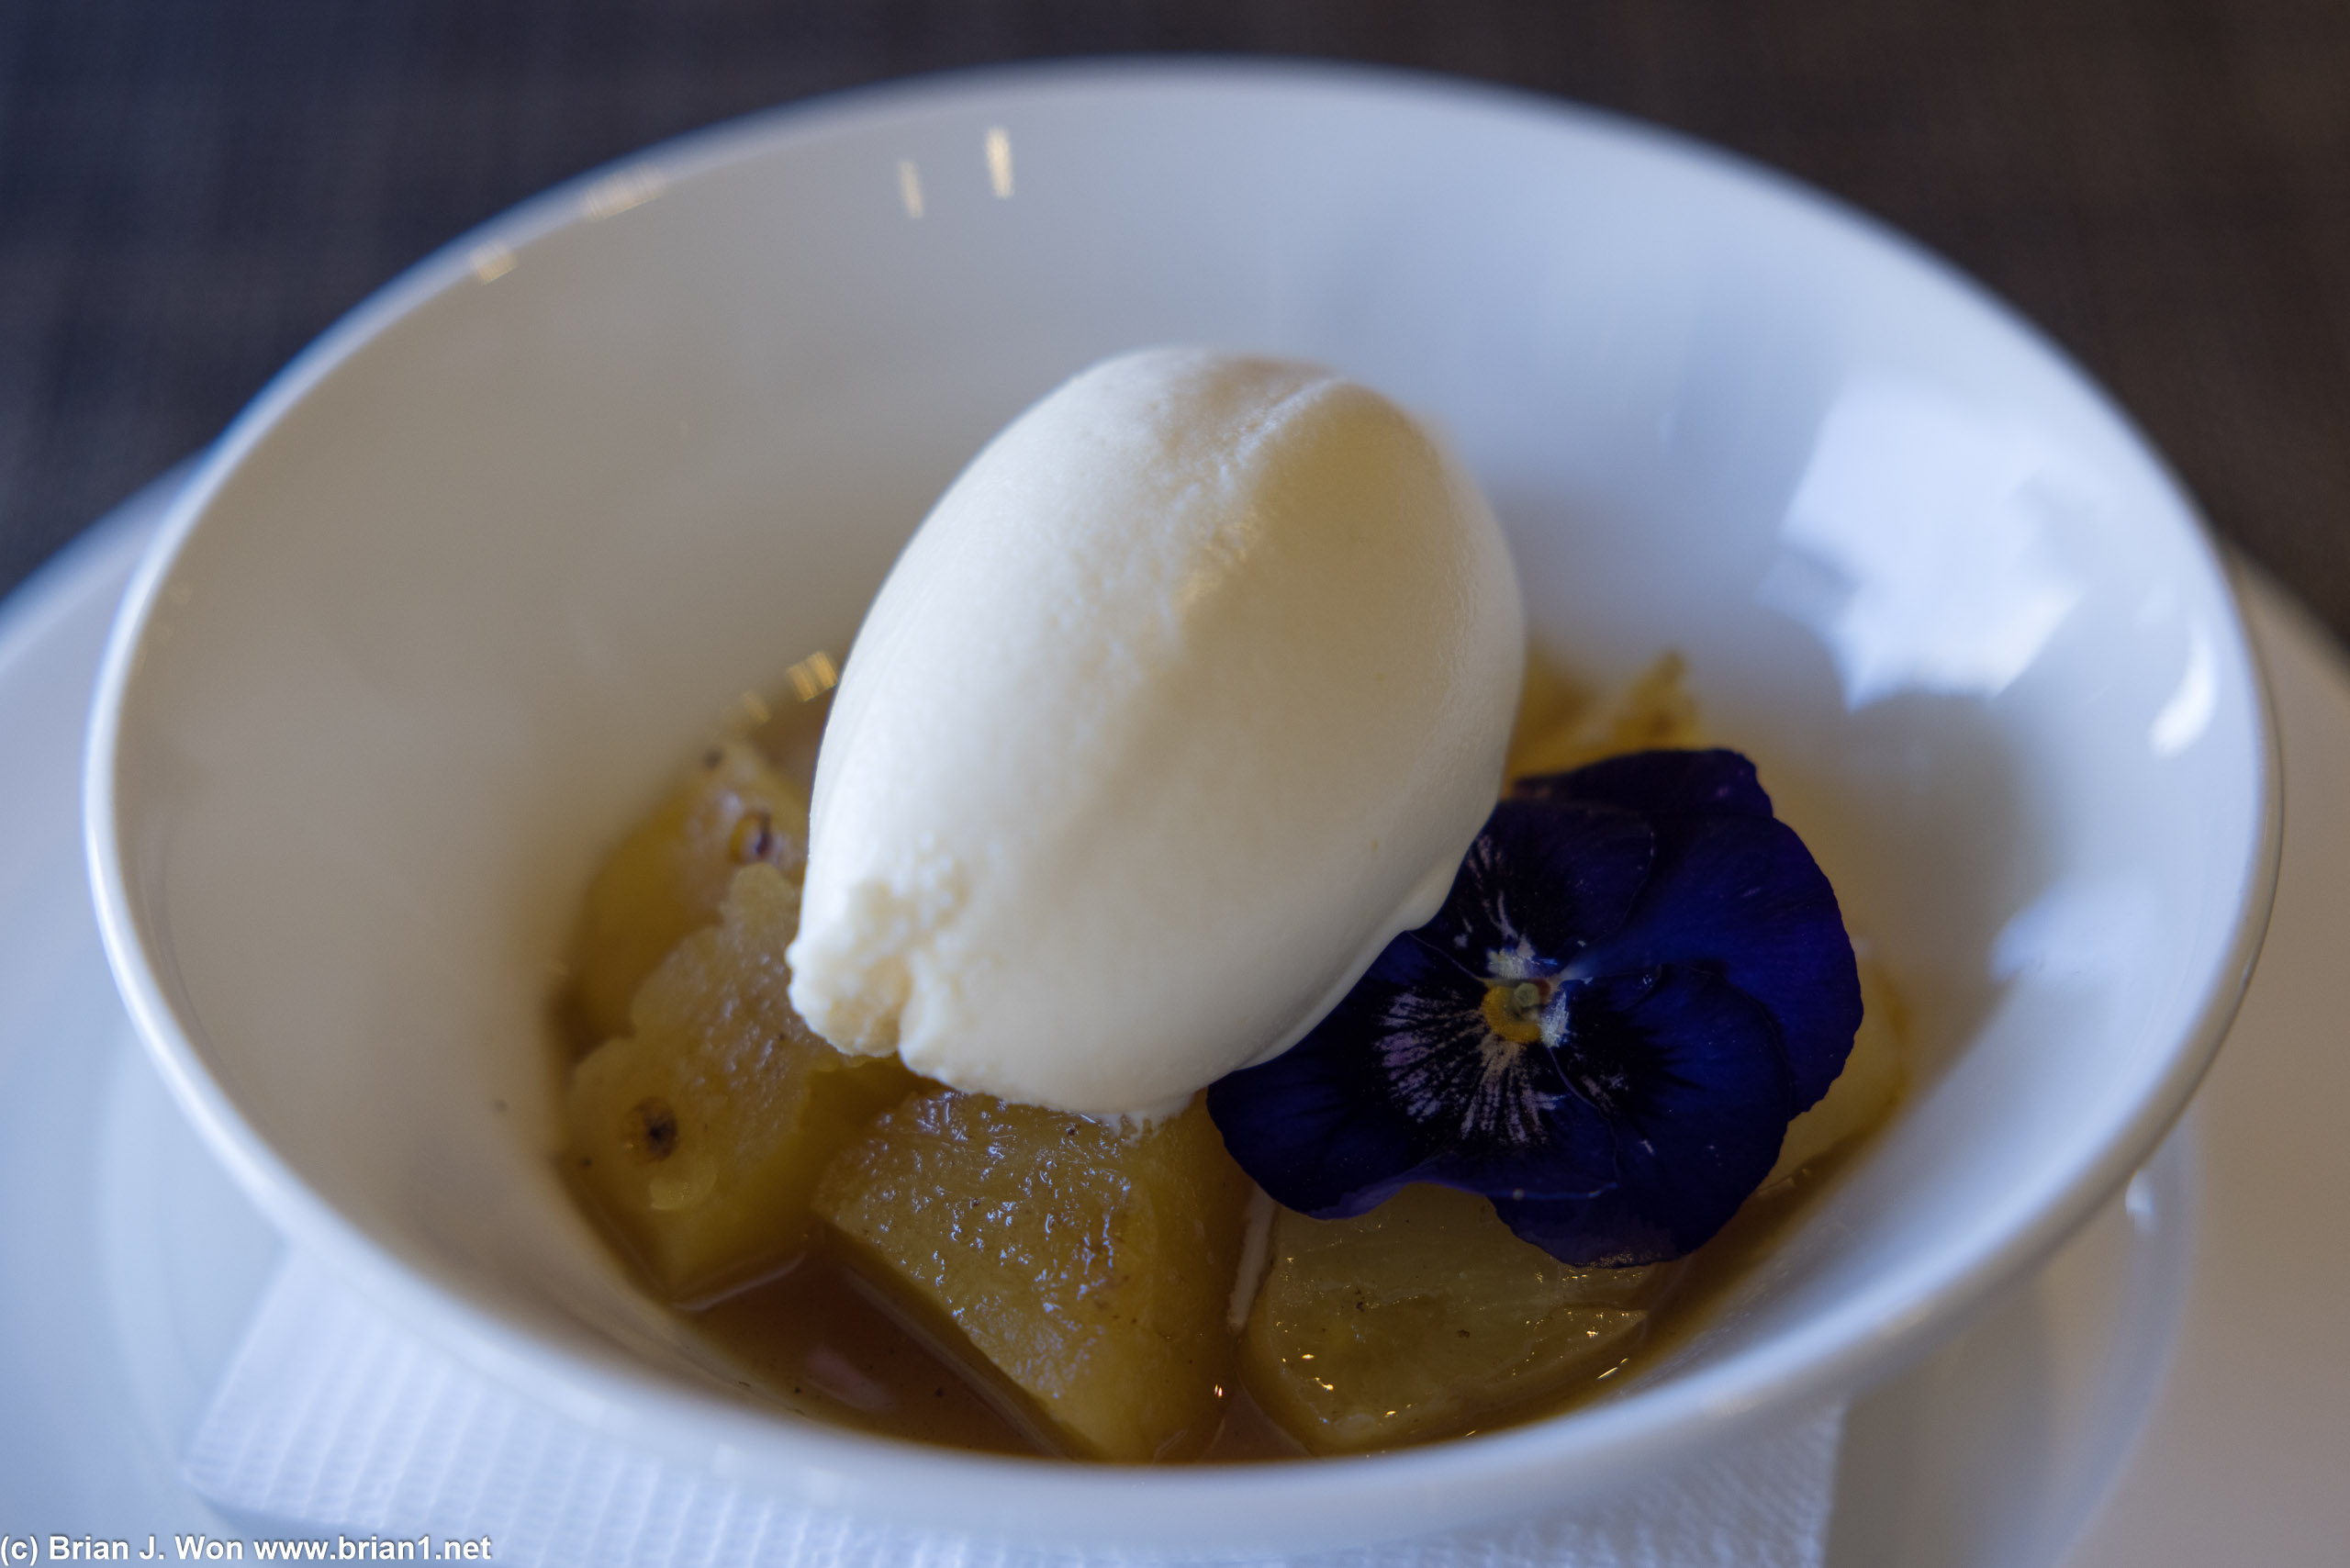 Spiced pineapple with basil and lime ice cream.